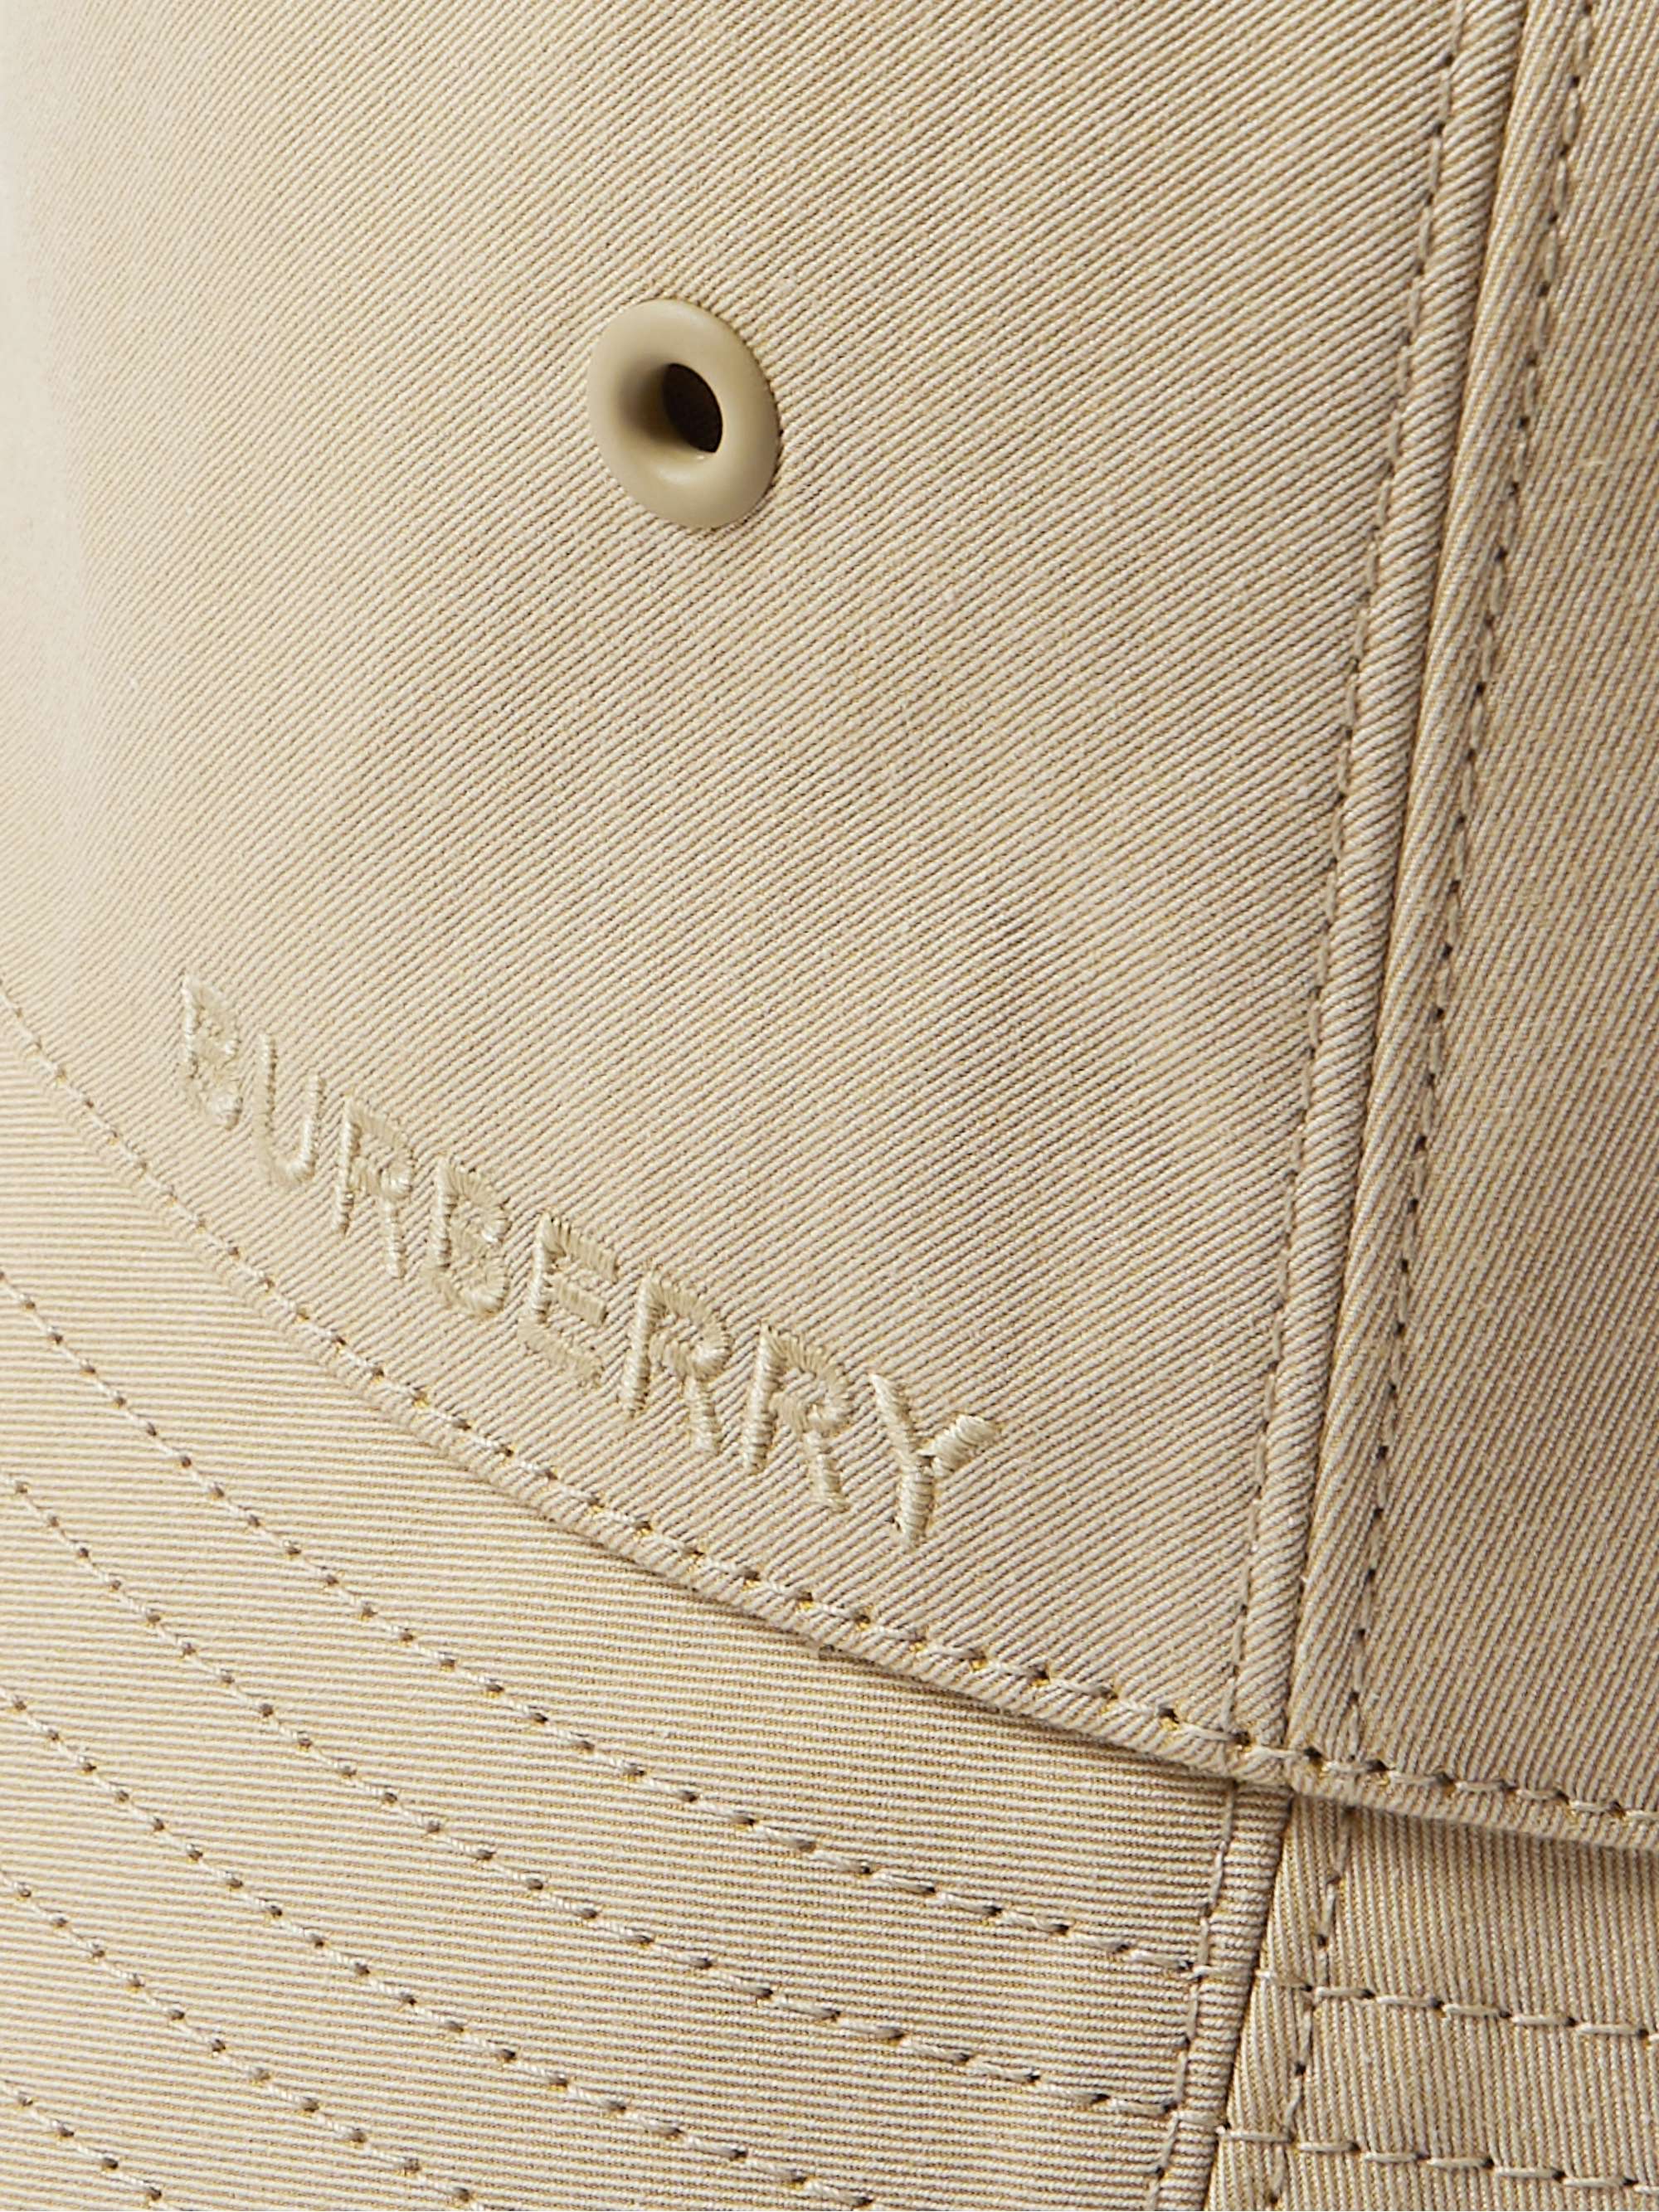 BURBERRY Reversible Logo-Embroidered Cotton-Twill Bucket Hat